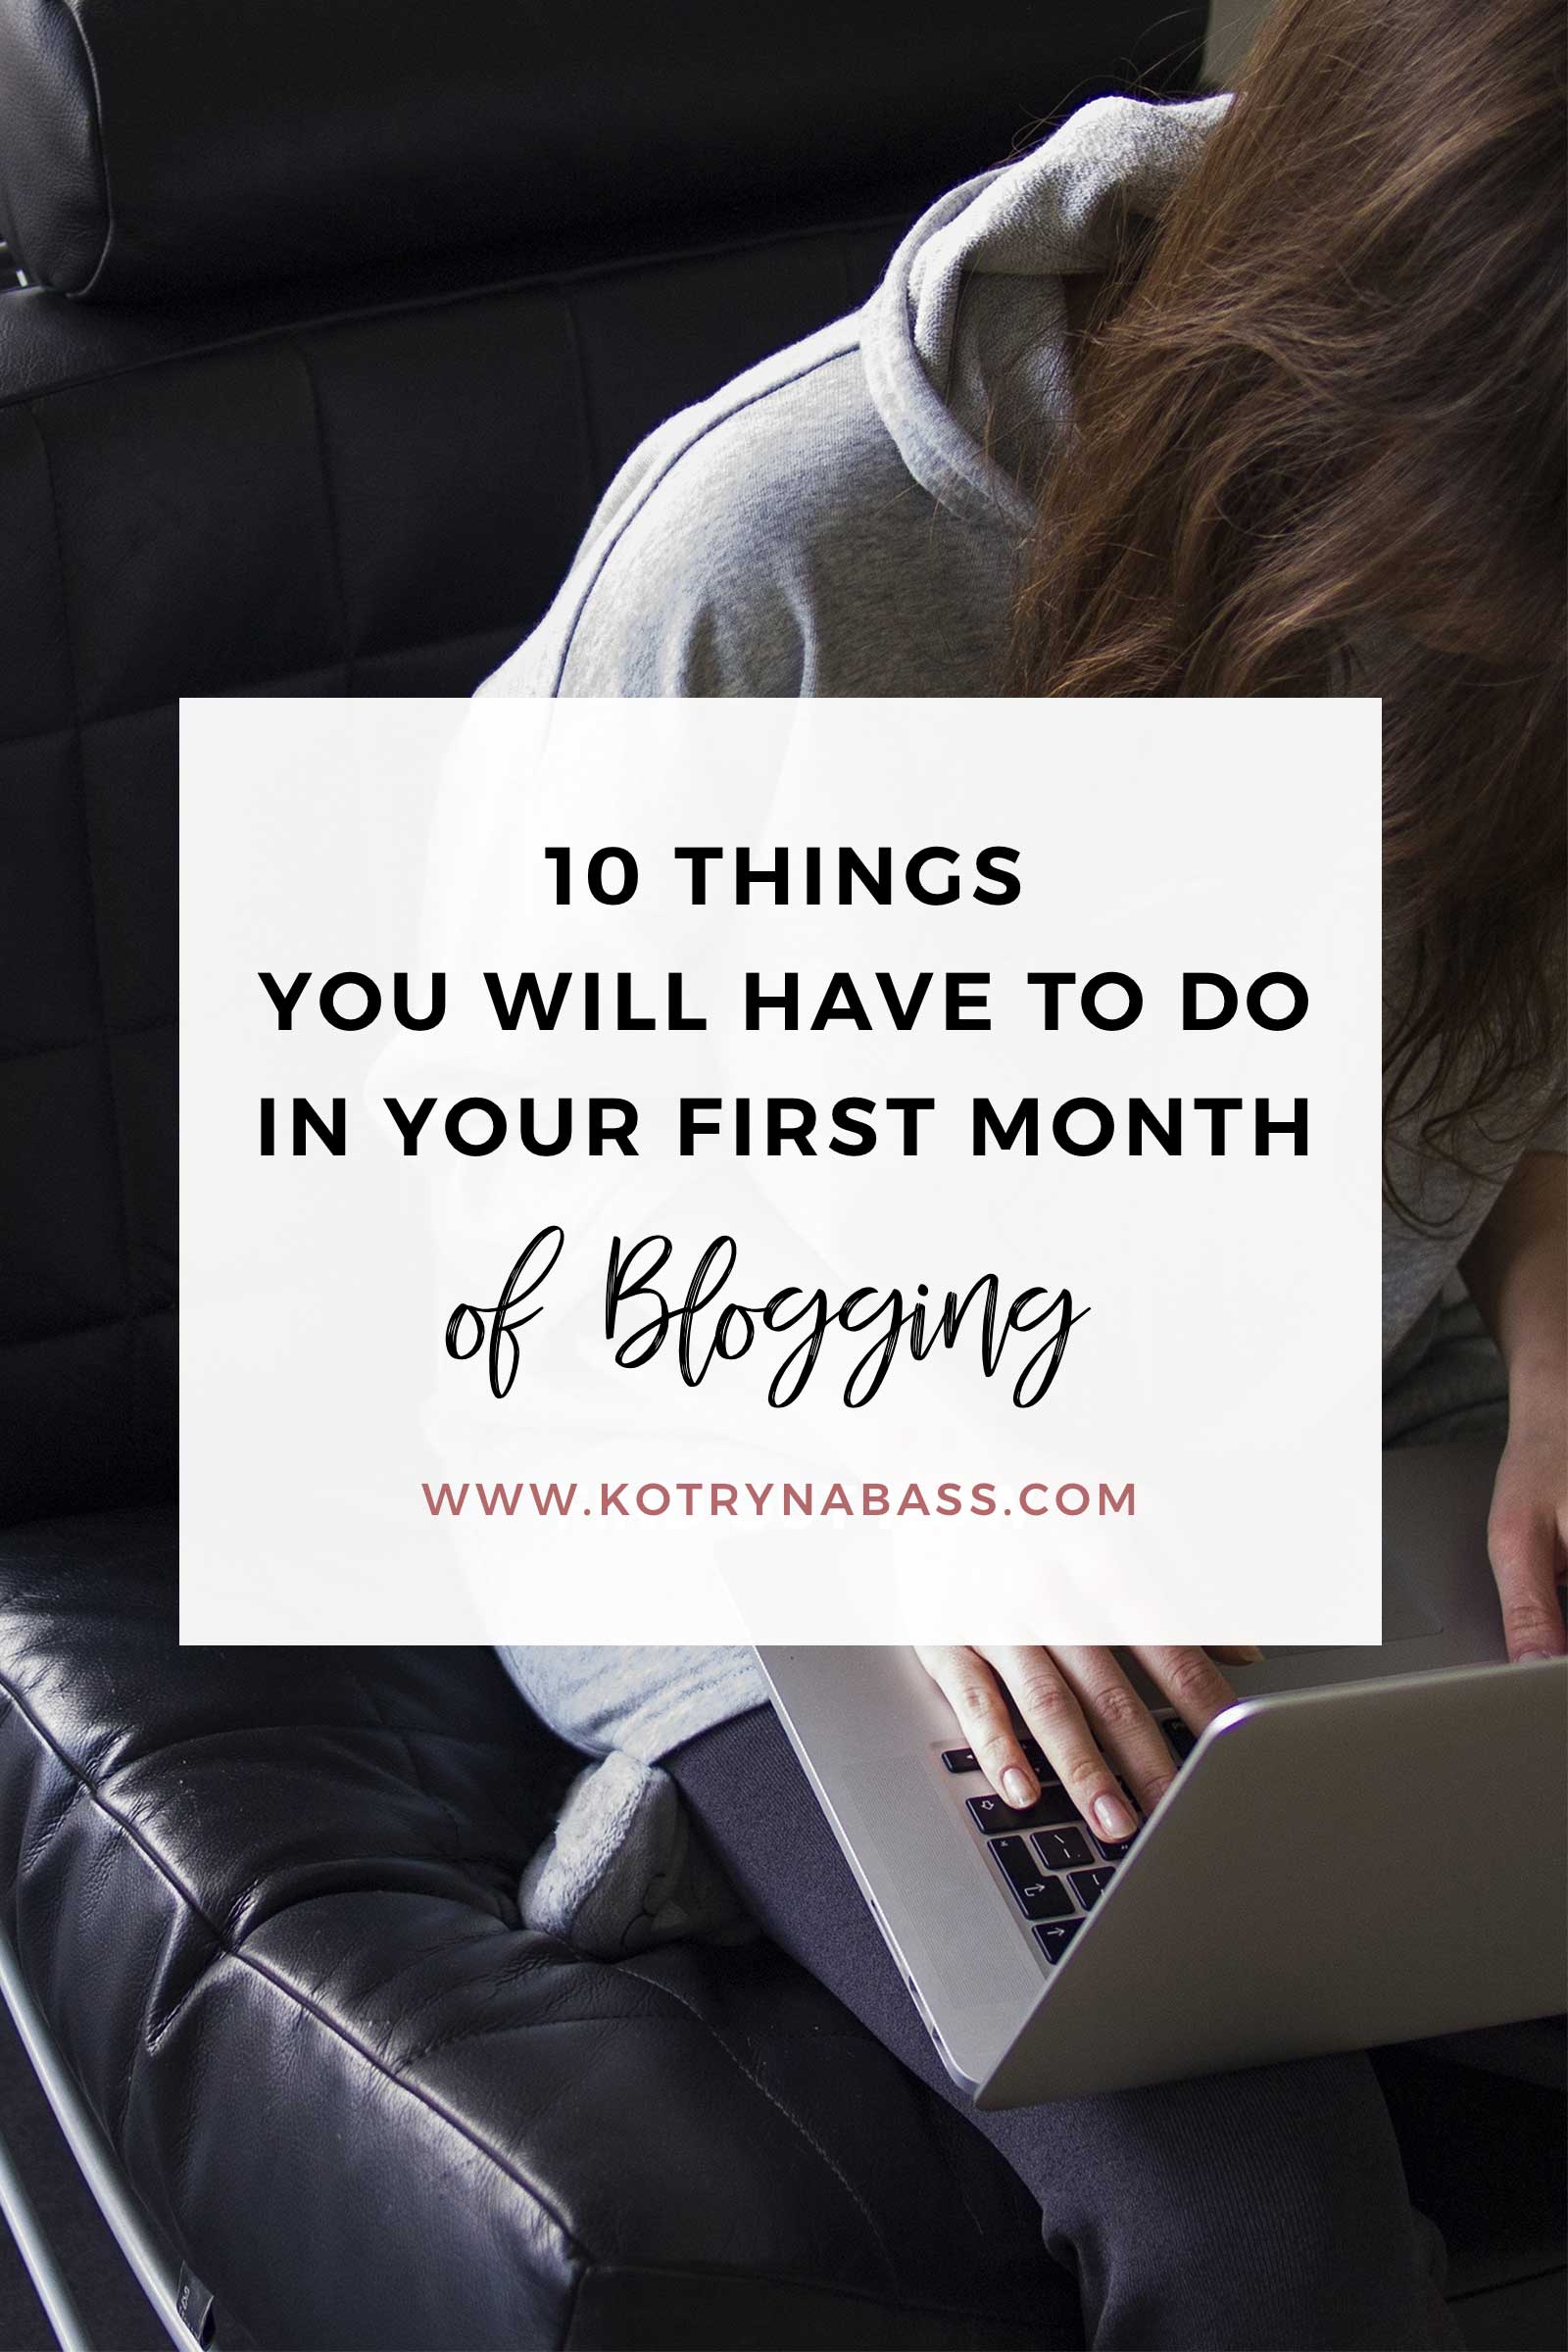 Summer is just perfect for starting your first blog! If you're finally ready to commit, but have no idea what your first month as a blogger will look like, here are 10 things you will have to do...